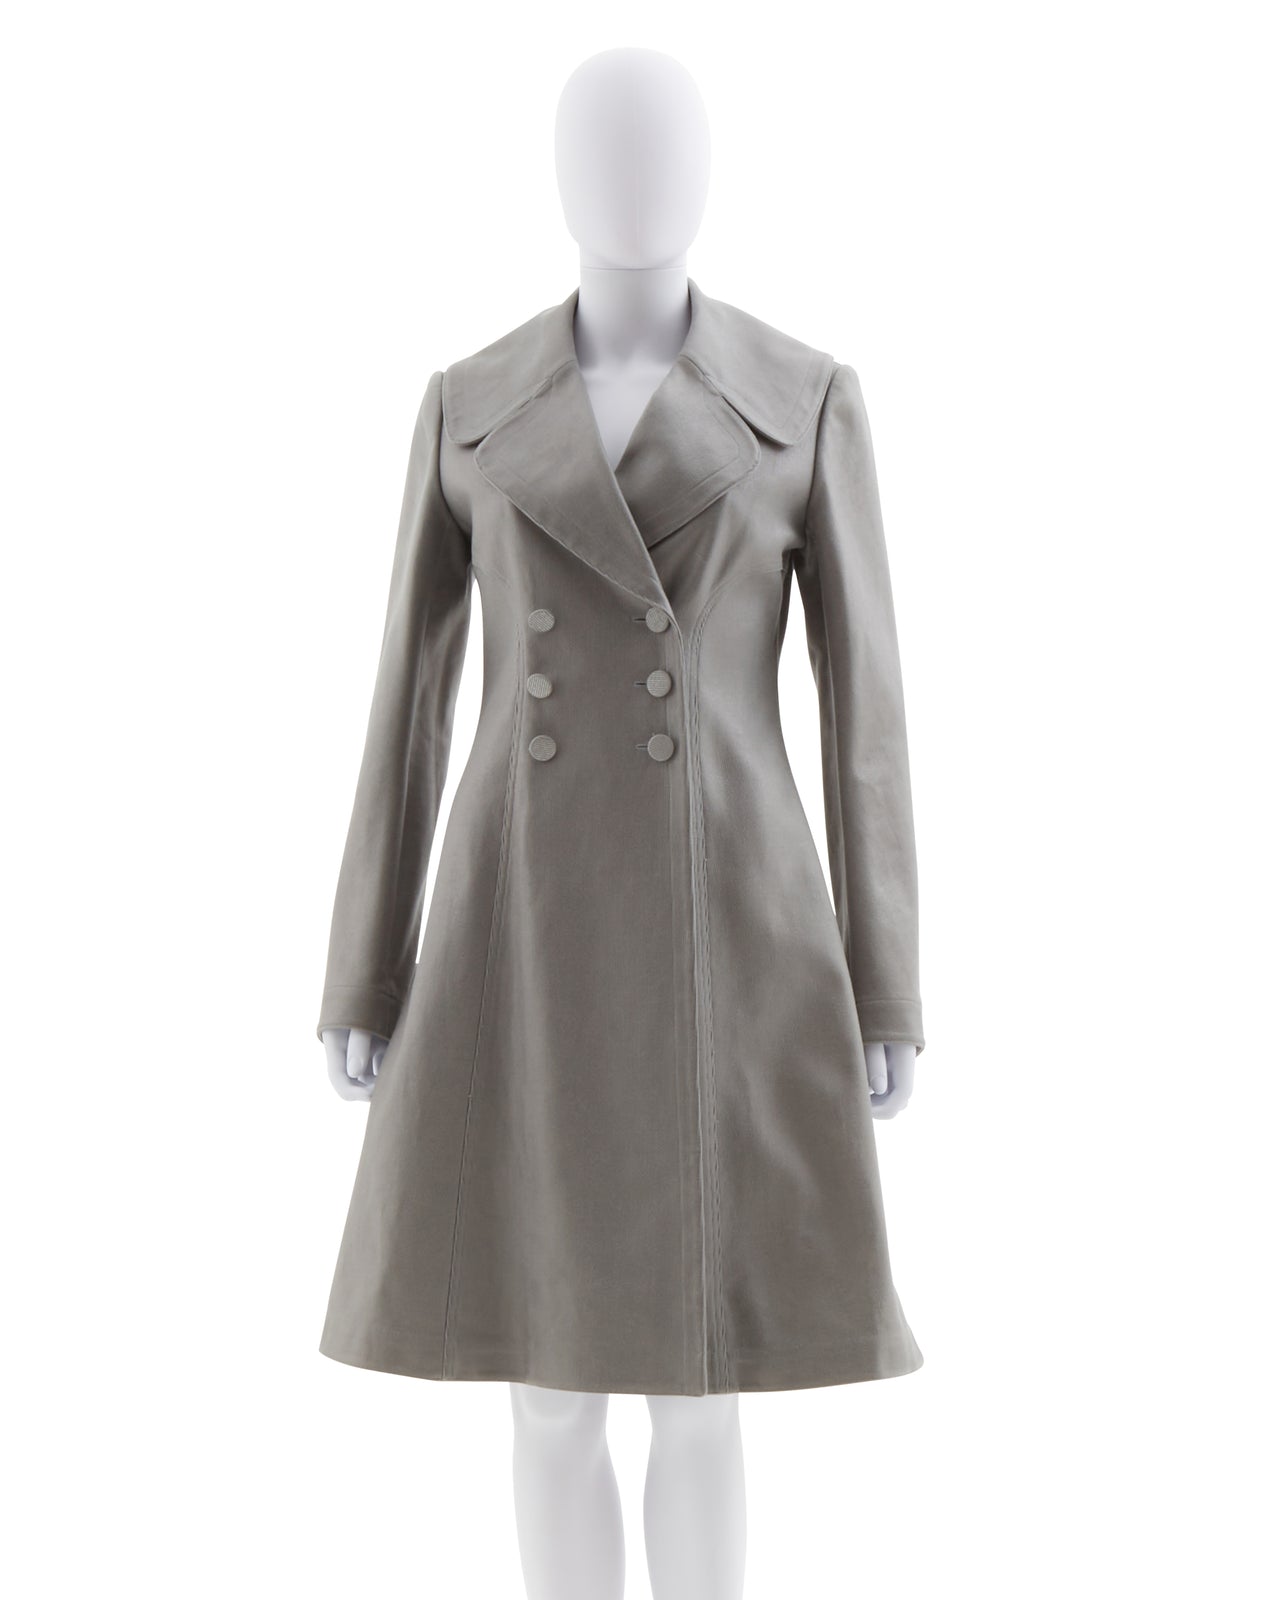 Azzedine Alaïa Early 2000s double breasted button fastenings silver and light dove grey princess coat